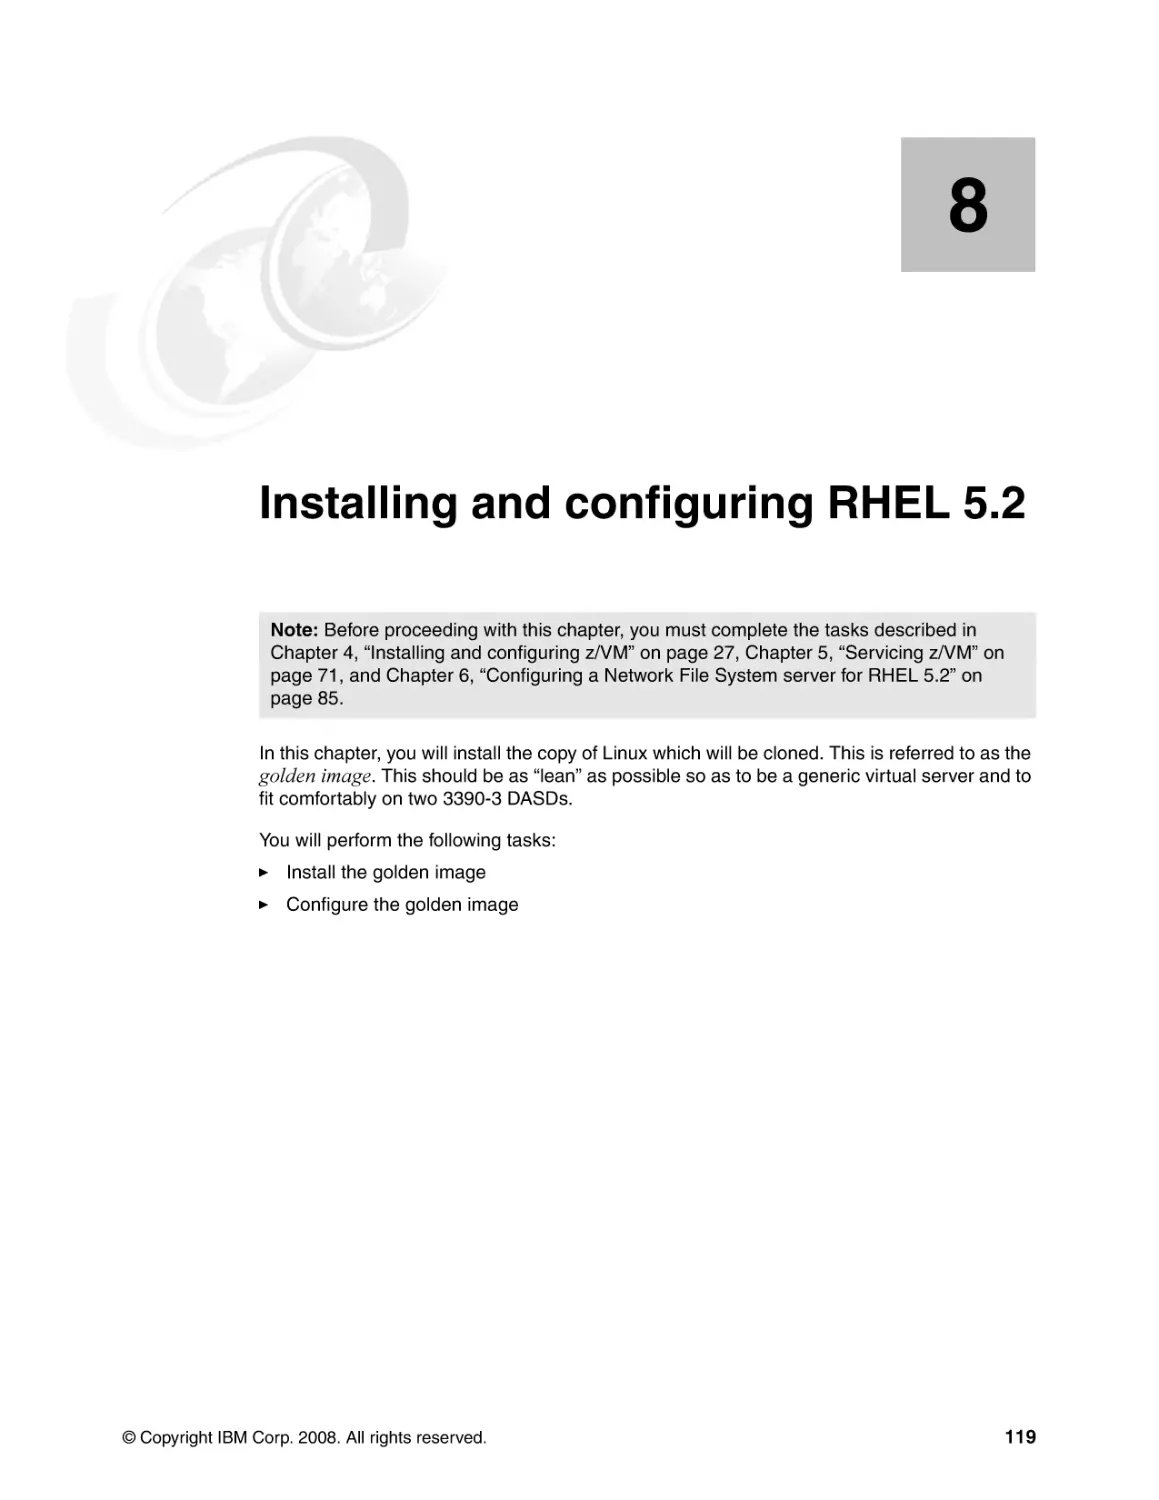 Chapter 8. Installing and configuring RHEL 5.2